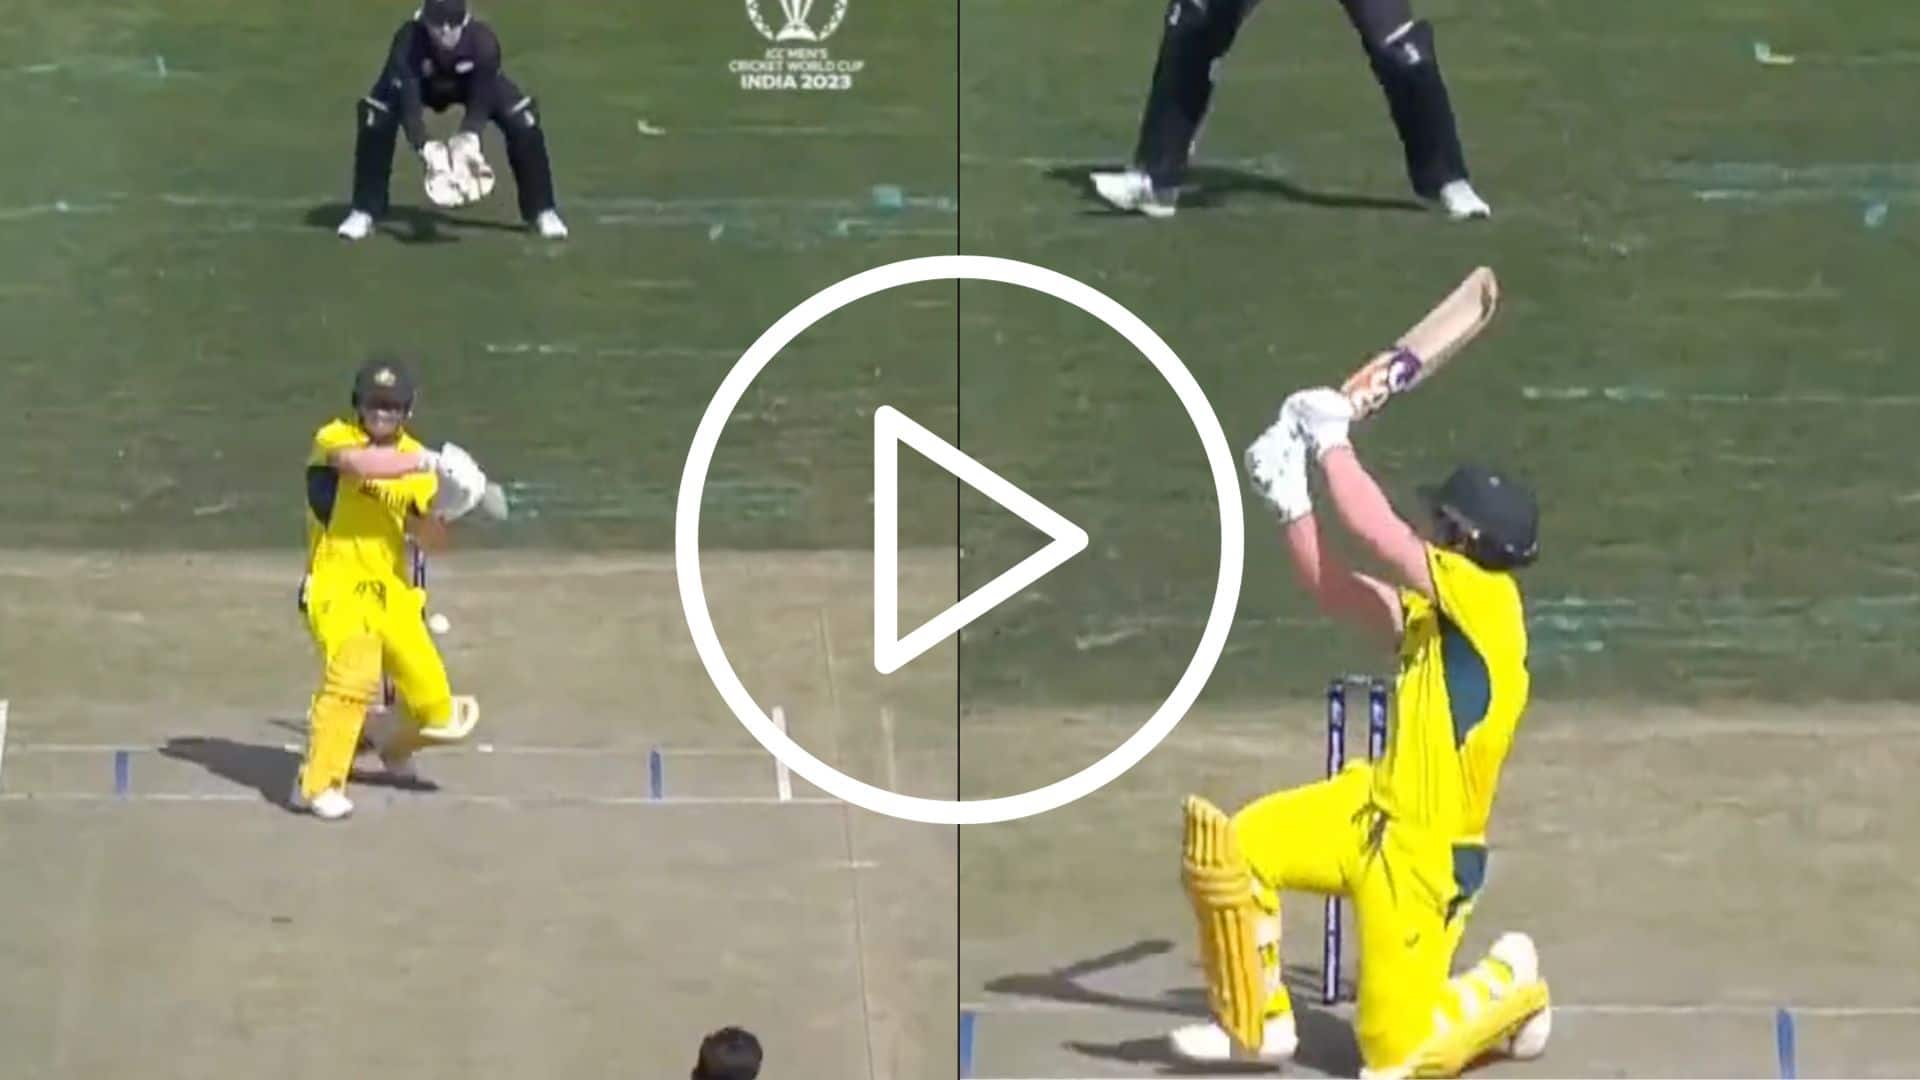 [Watch] David Warner ‘Dispatches’ Trent Boult With a Scorching Hook Shot For Six